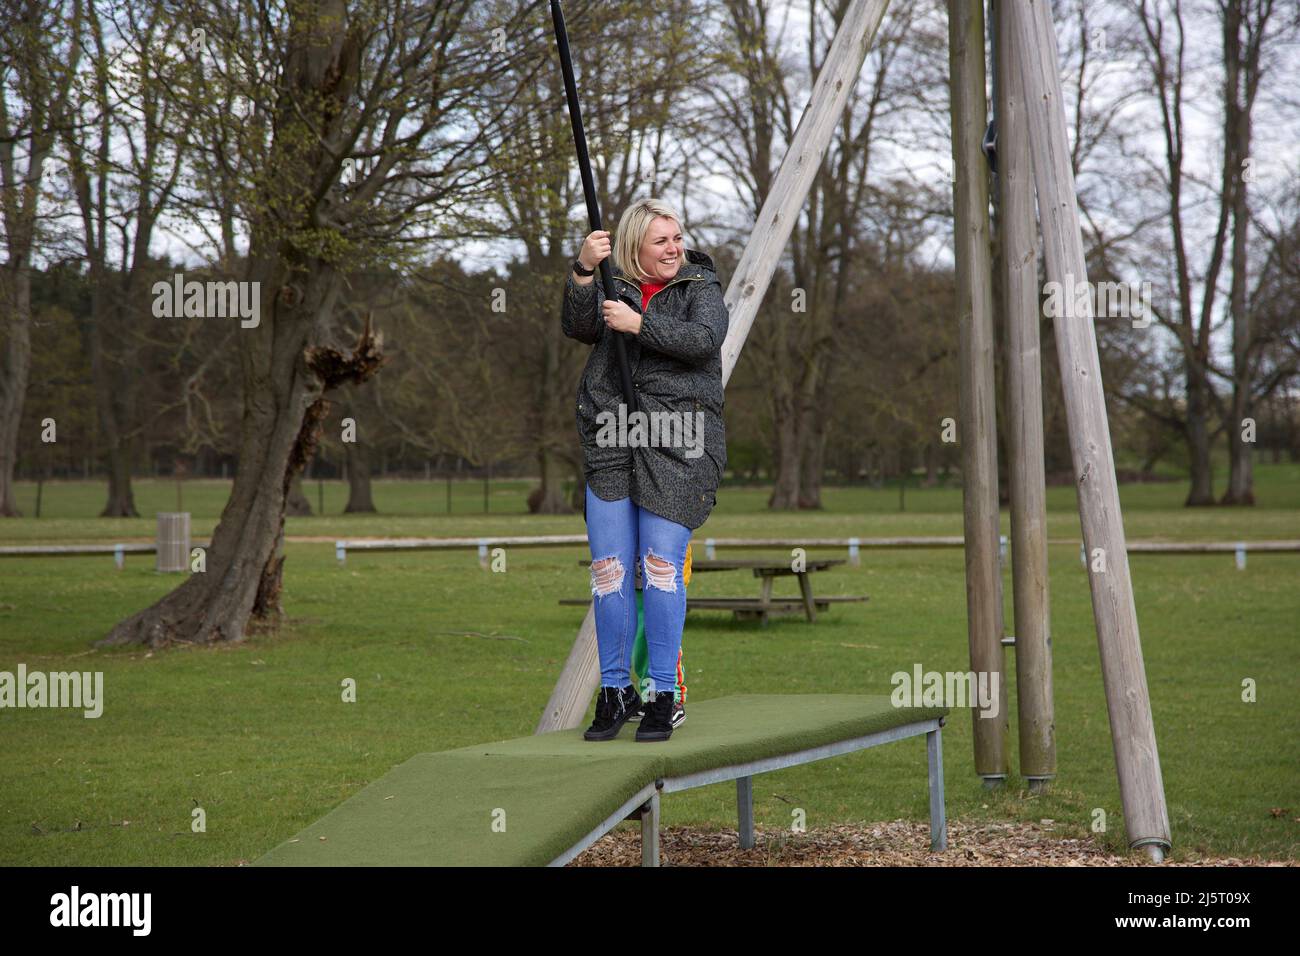 An adult female going on a zip wire ride, UK Stock Photo